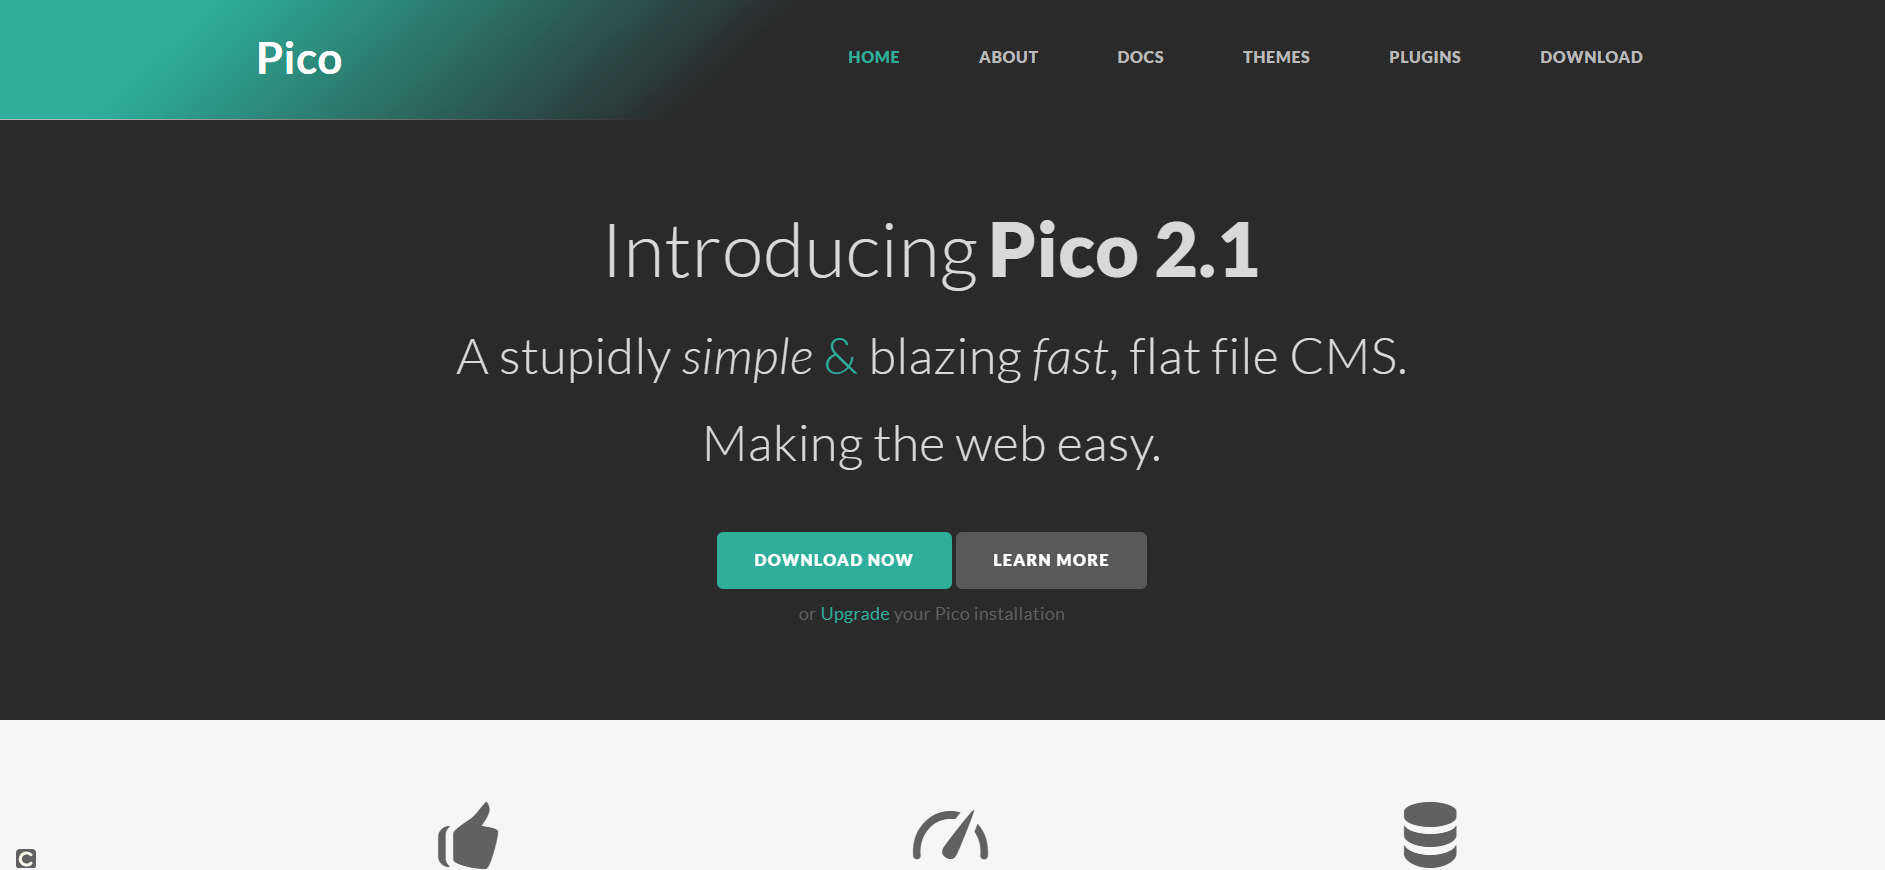 Homepage of the Pico project